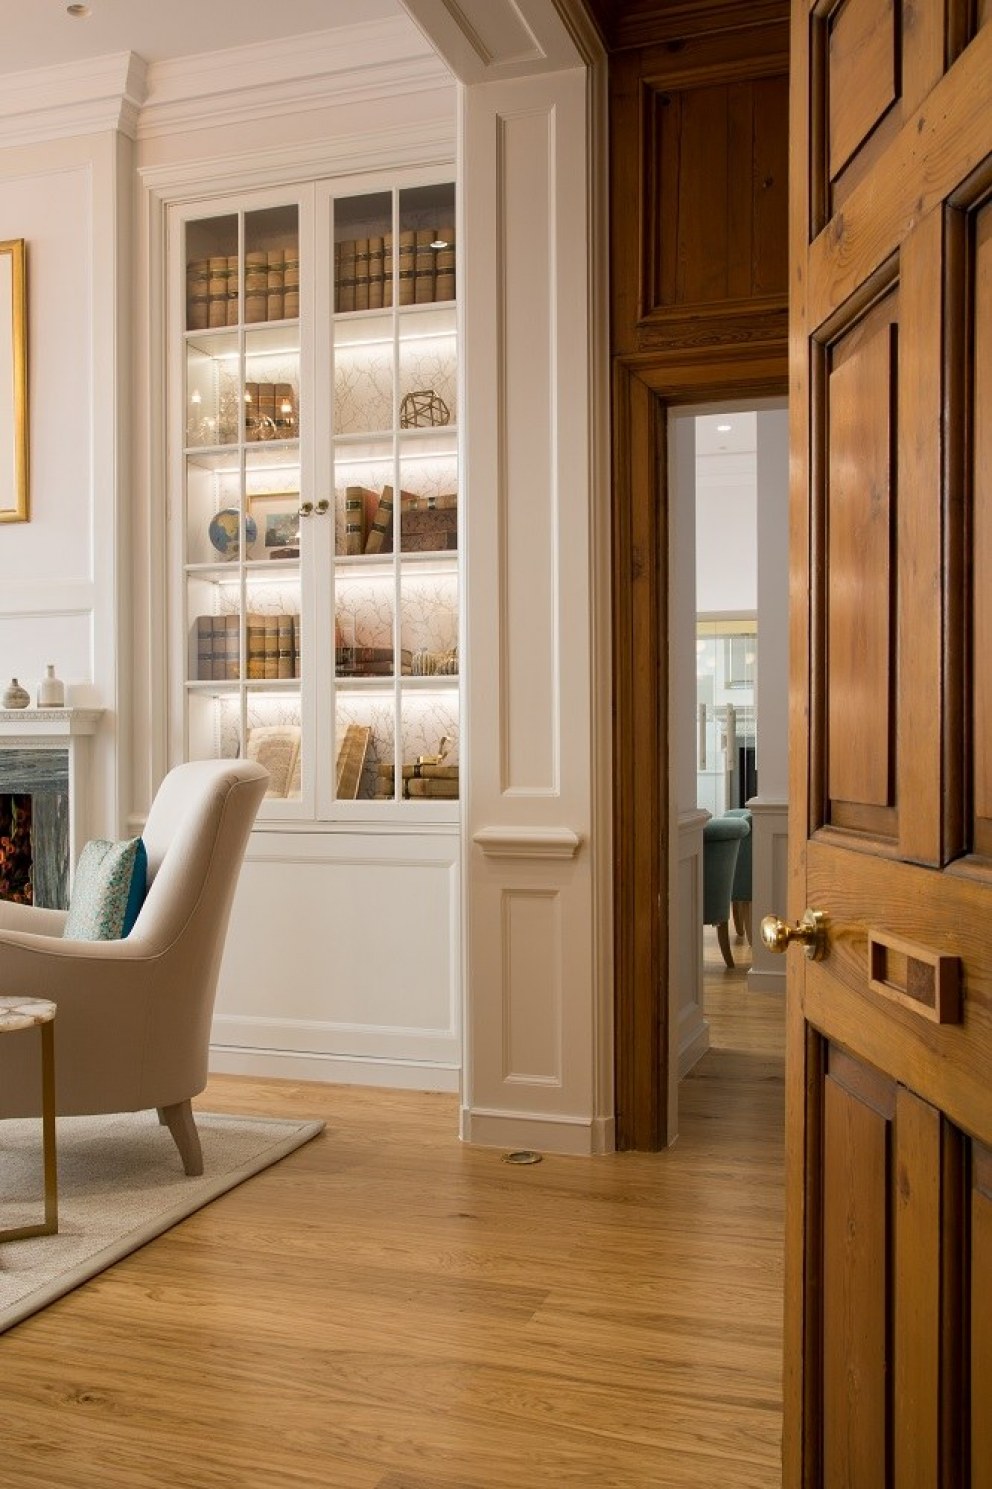 Barristers' Chambers Reception & Waiting Room | Waiting Room 5 | Interior Designers